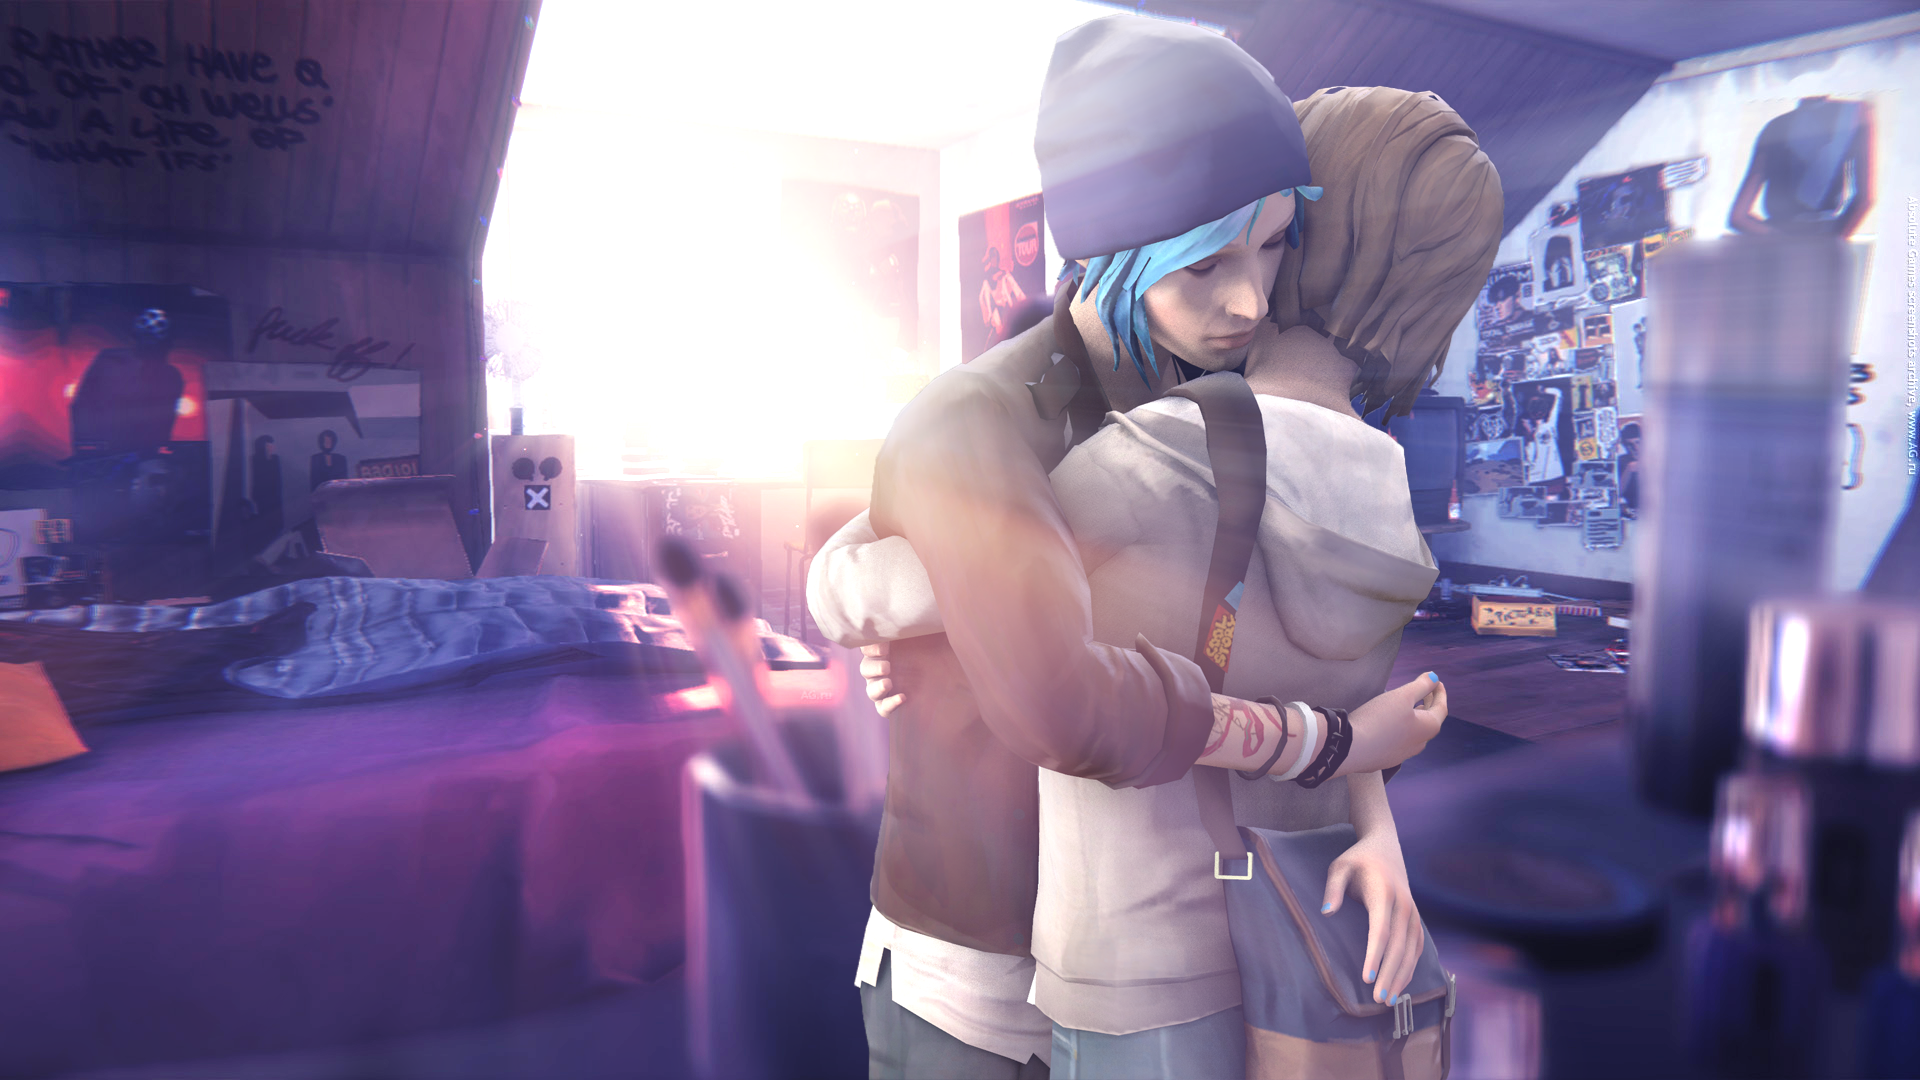 General 1920x1080 Life Is Strange Max Caulfield Chloe Price hugging video games video game characters video game girls two women screen shot